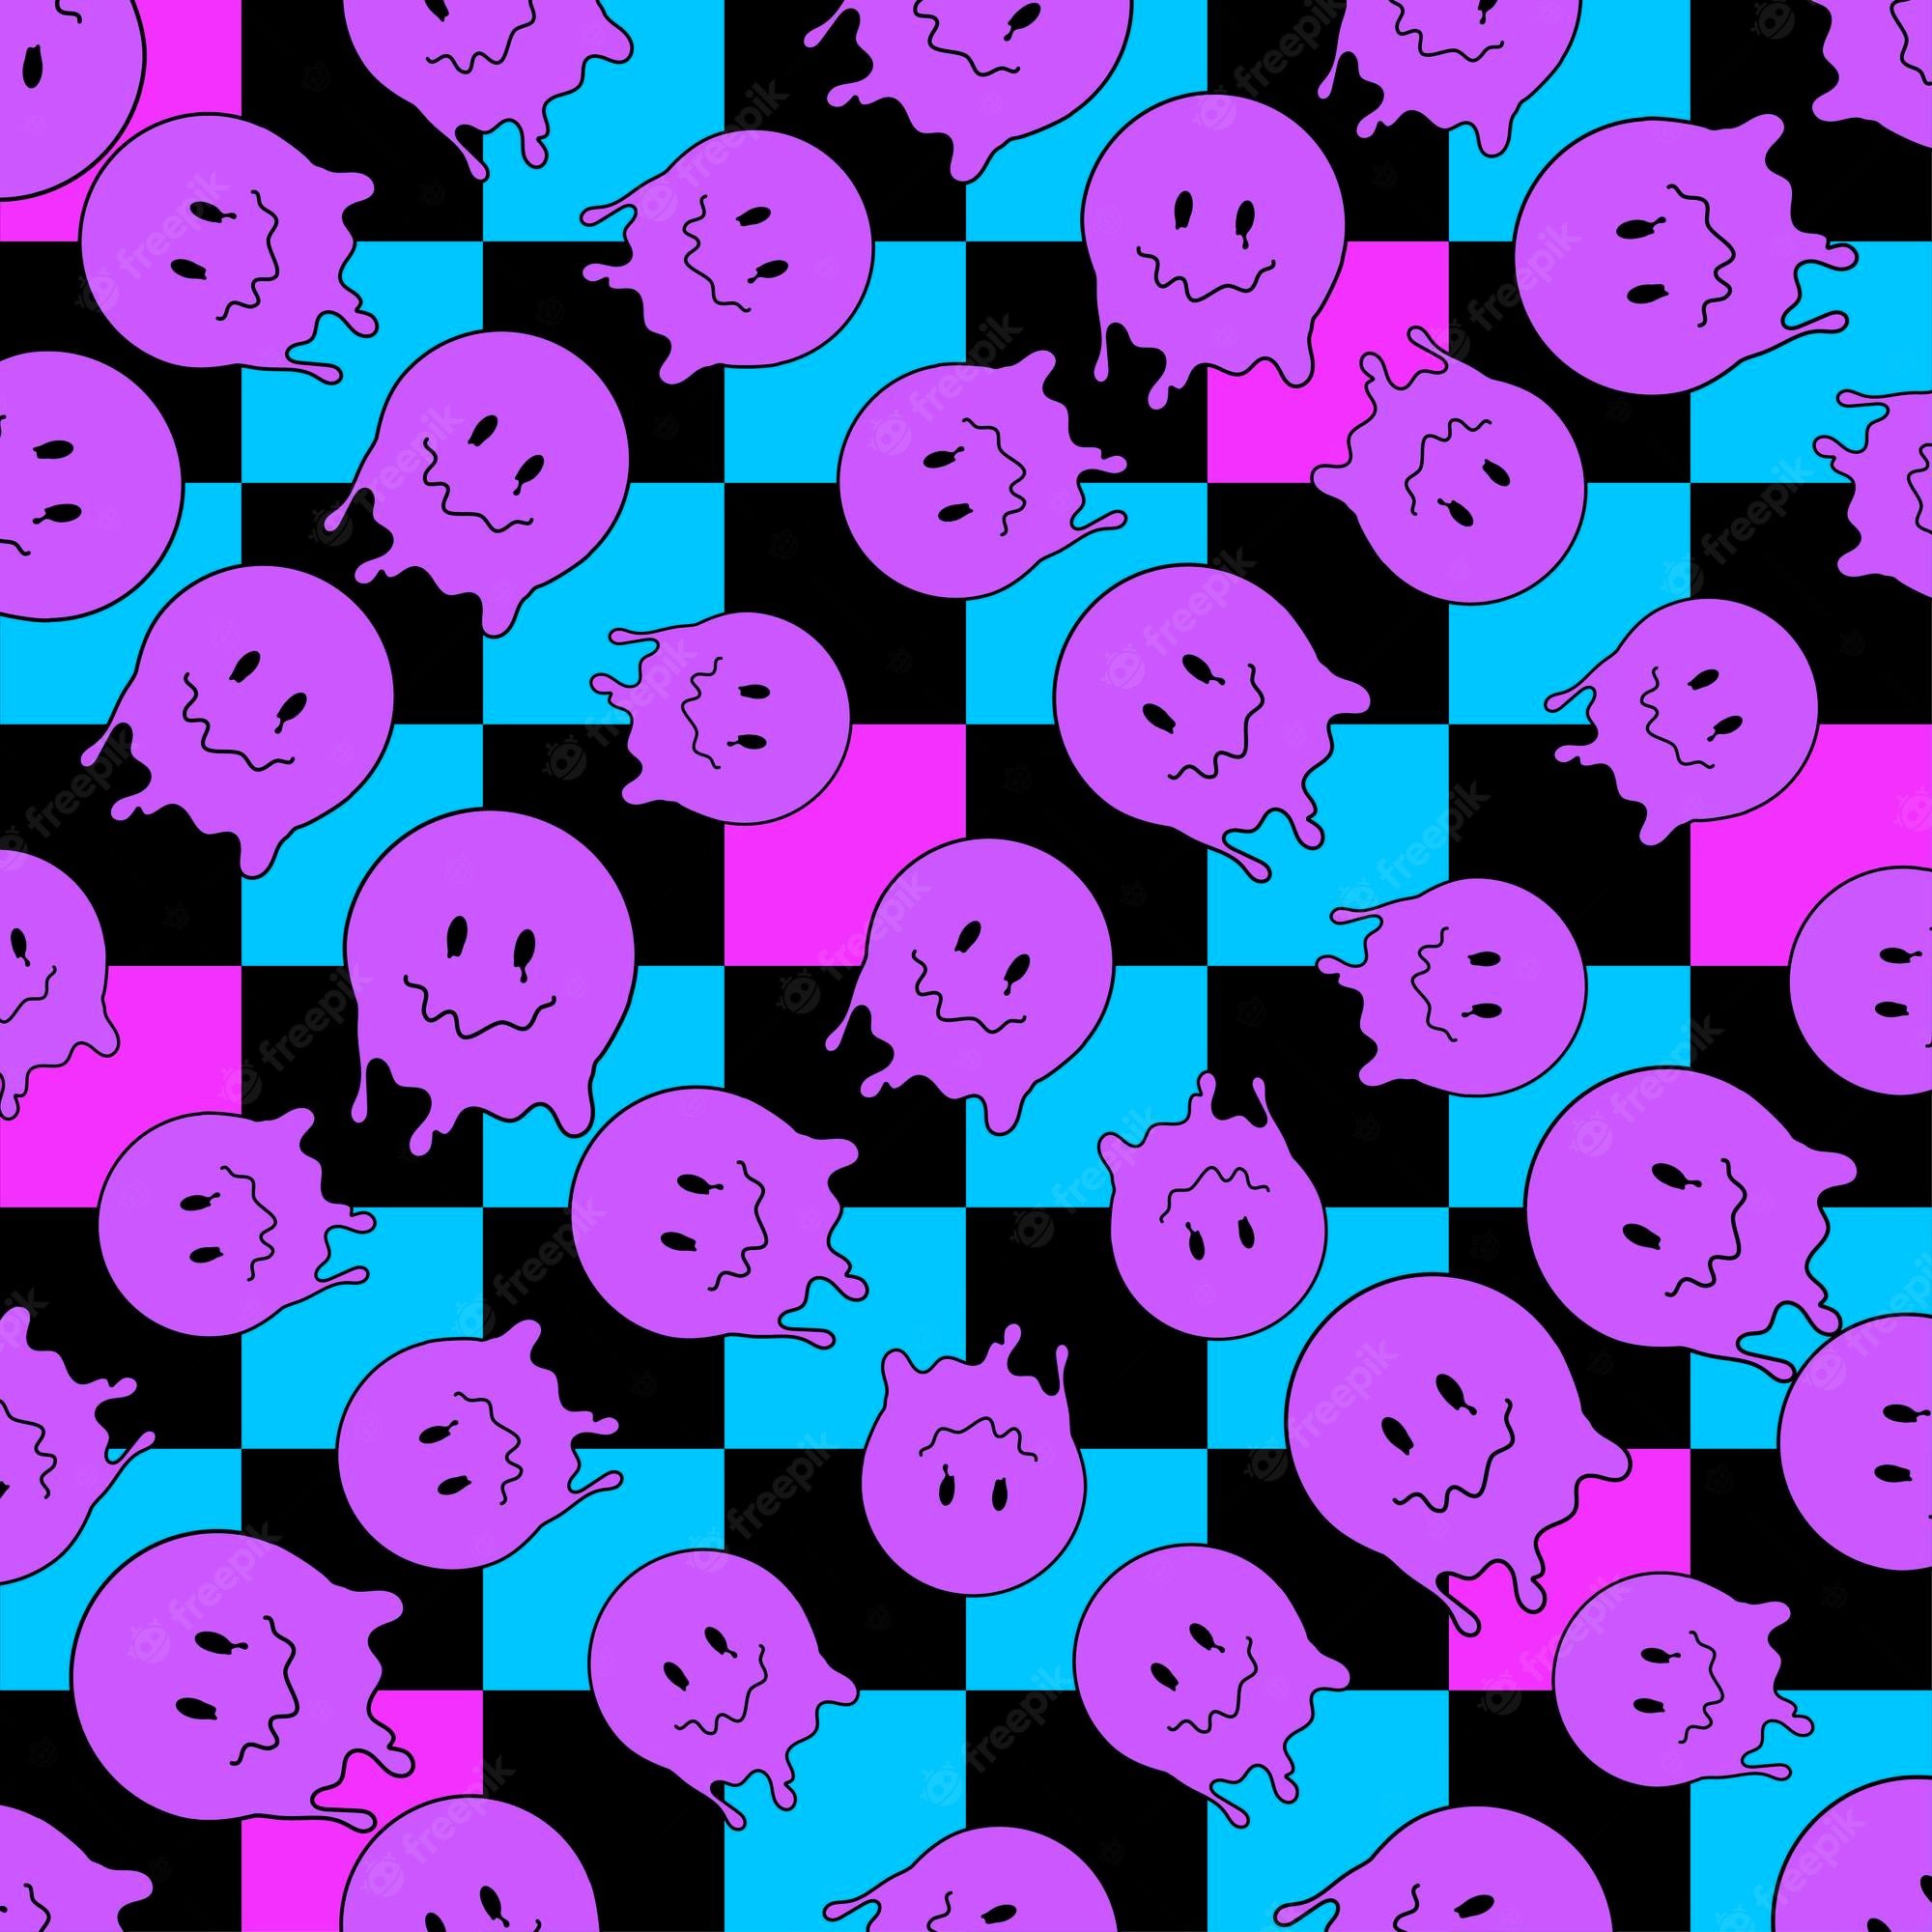 A pattern of purple and blue ghost on black checkered background - Trippy